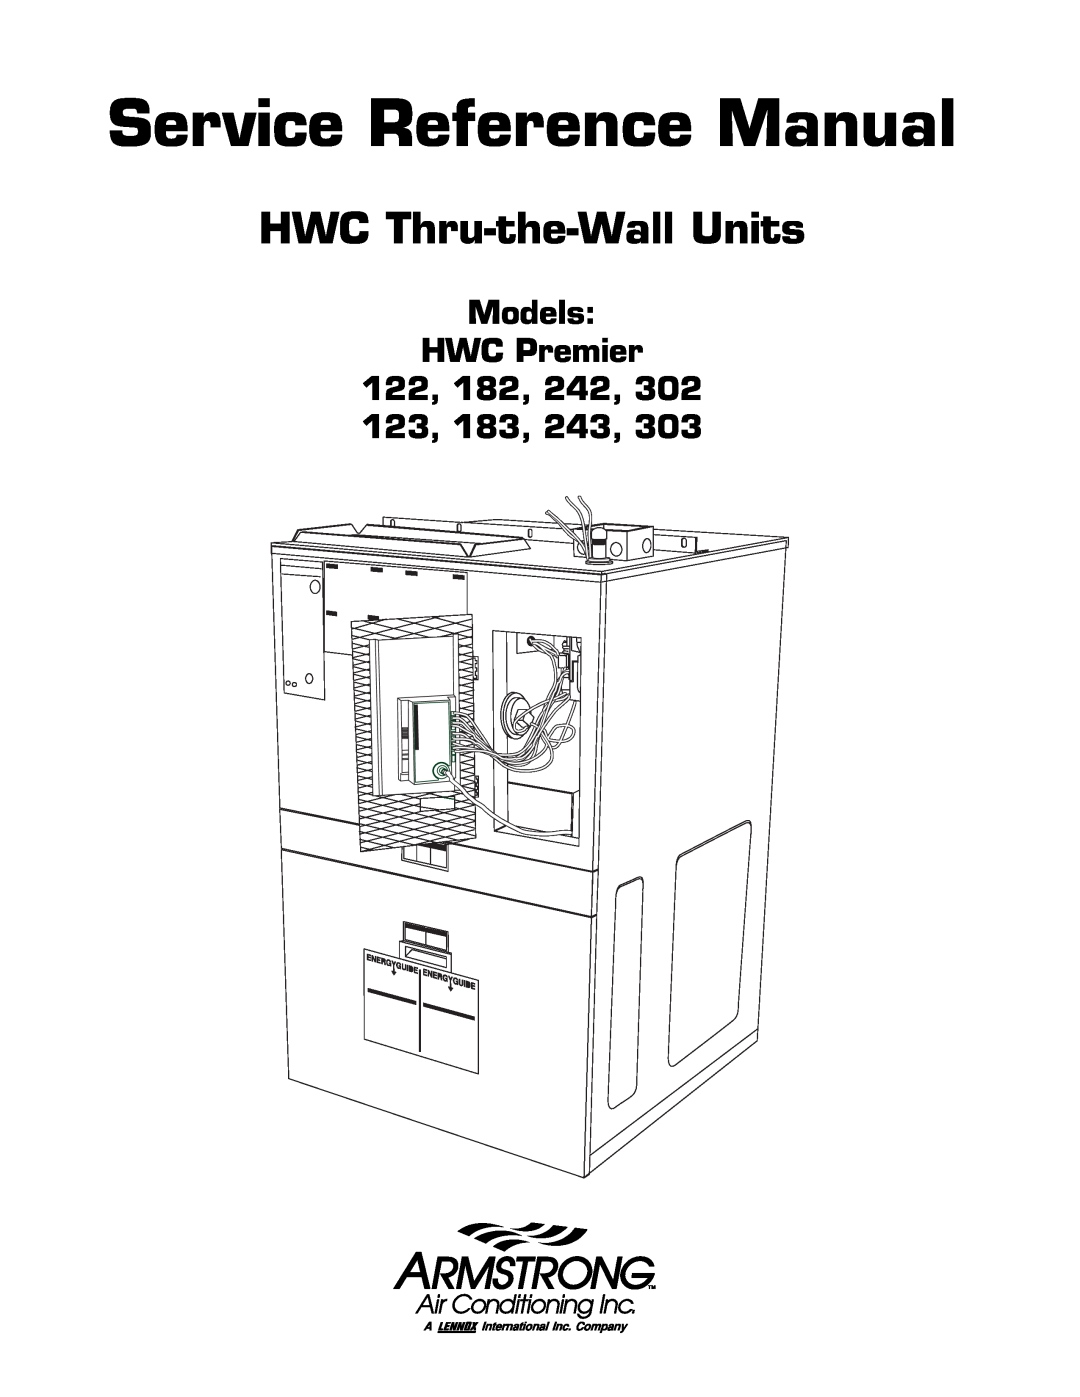 Armstrong World Industries 302, 243, 242, 122, 123, 203, 182, 183 manual Service Reference Manual, HWC Thru-the-Wall Units 